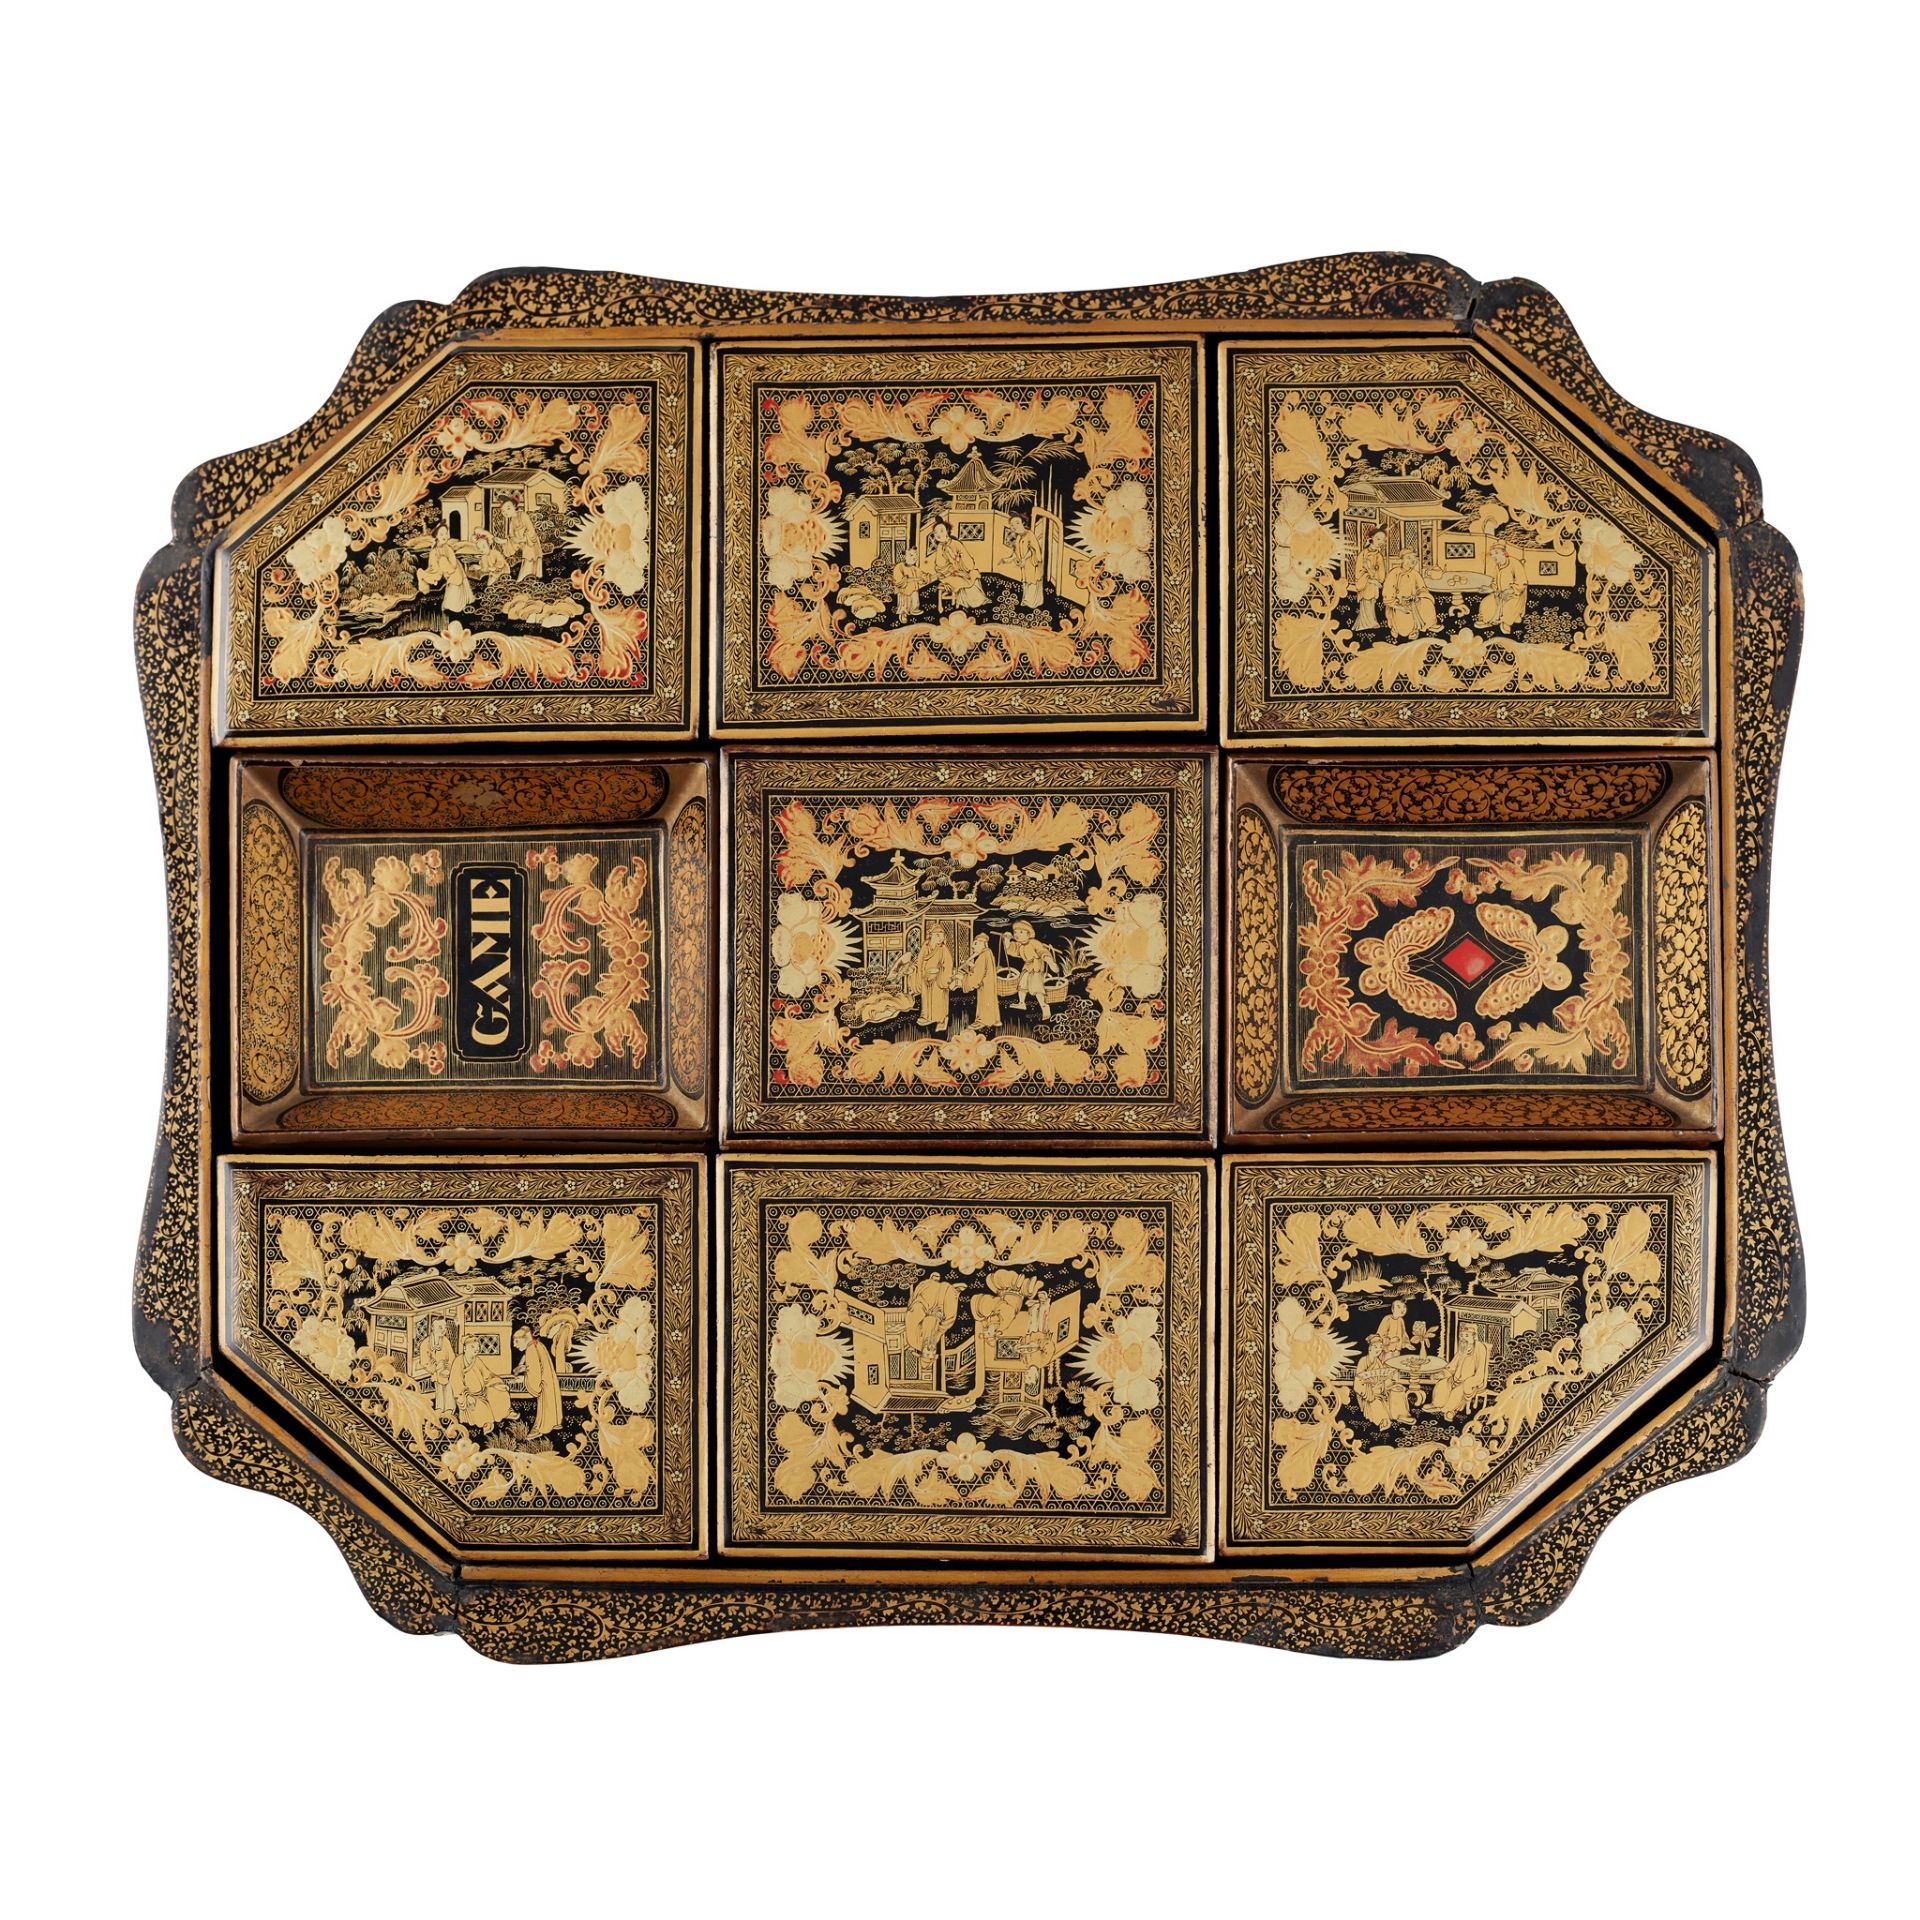 EXPORT GILT AND BLACK LACQUERED GAMES BOX QING DYNASTY, 19TH CENTURY - Image 3 of 4